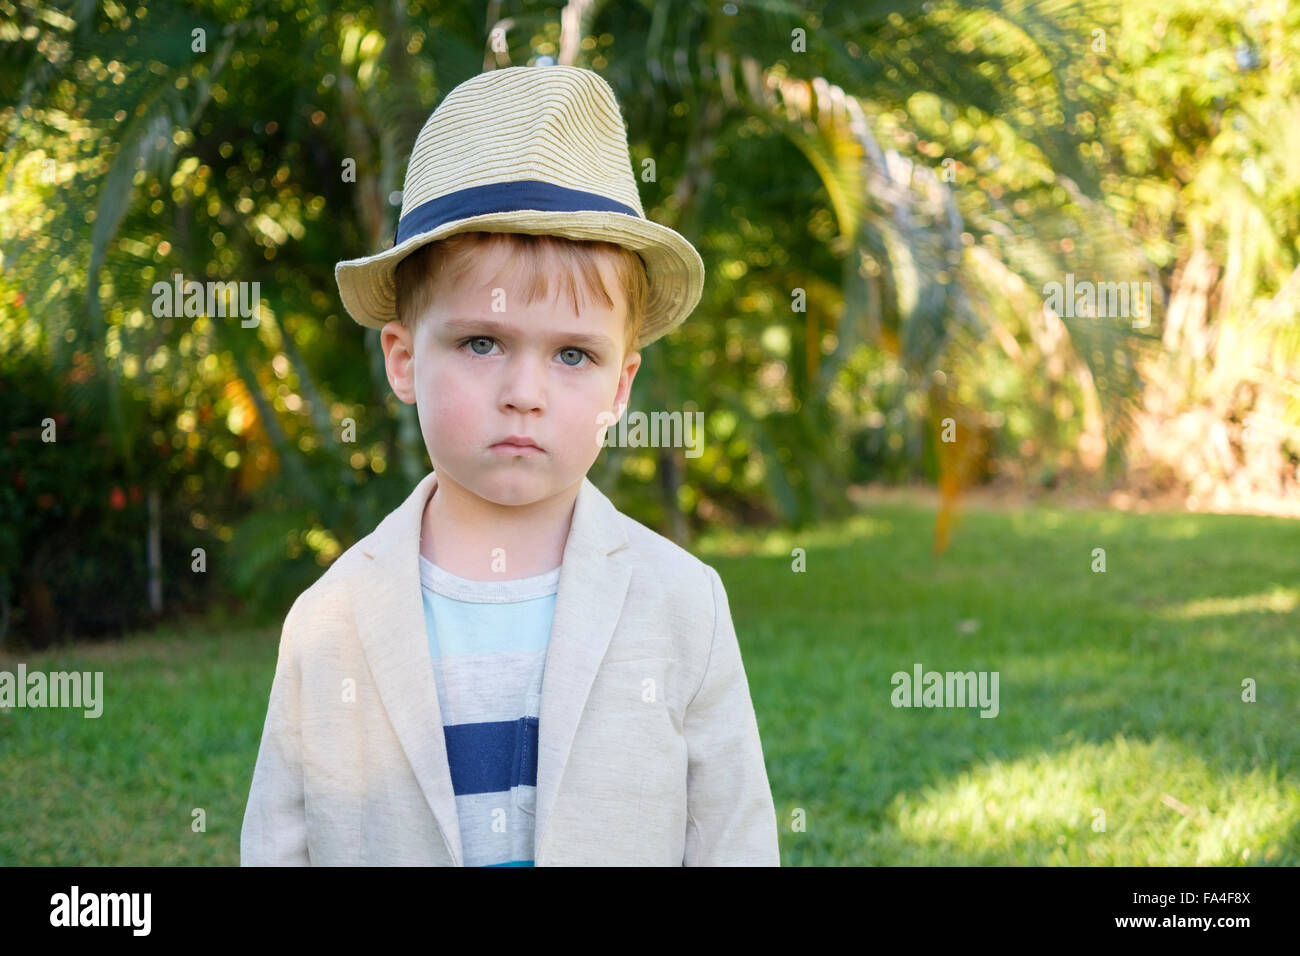 Child portrait in formal attire - Back lit portrait of toddler boy with suit jacket and hat in tropical environment Stock Photo